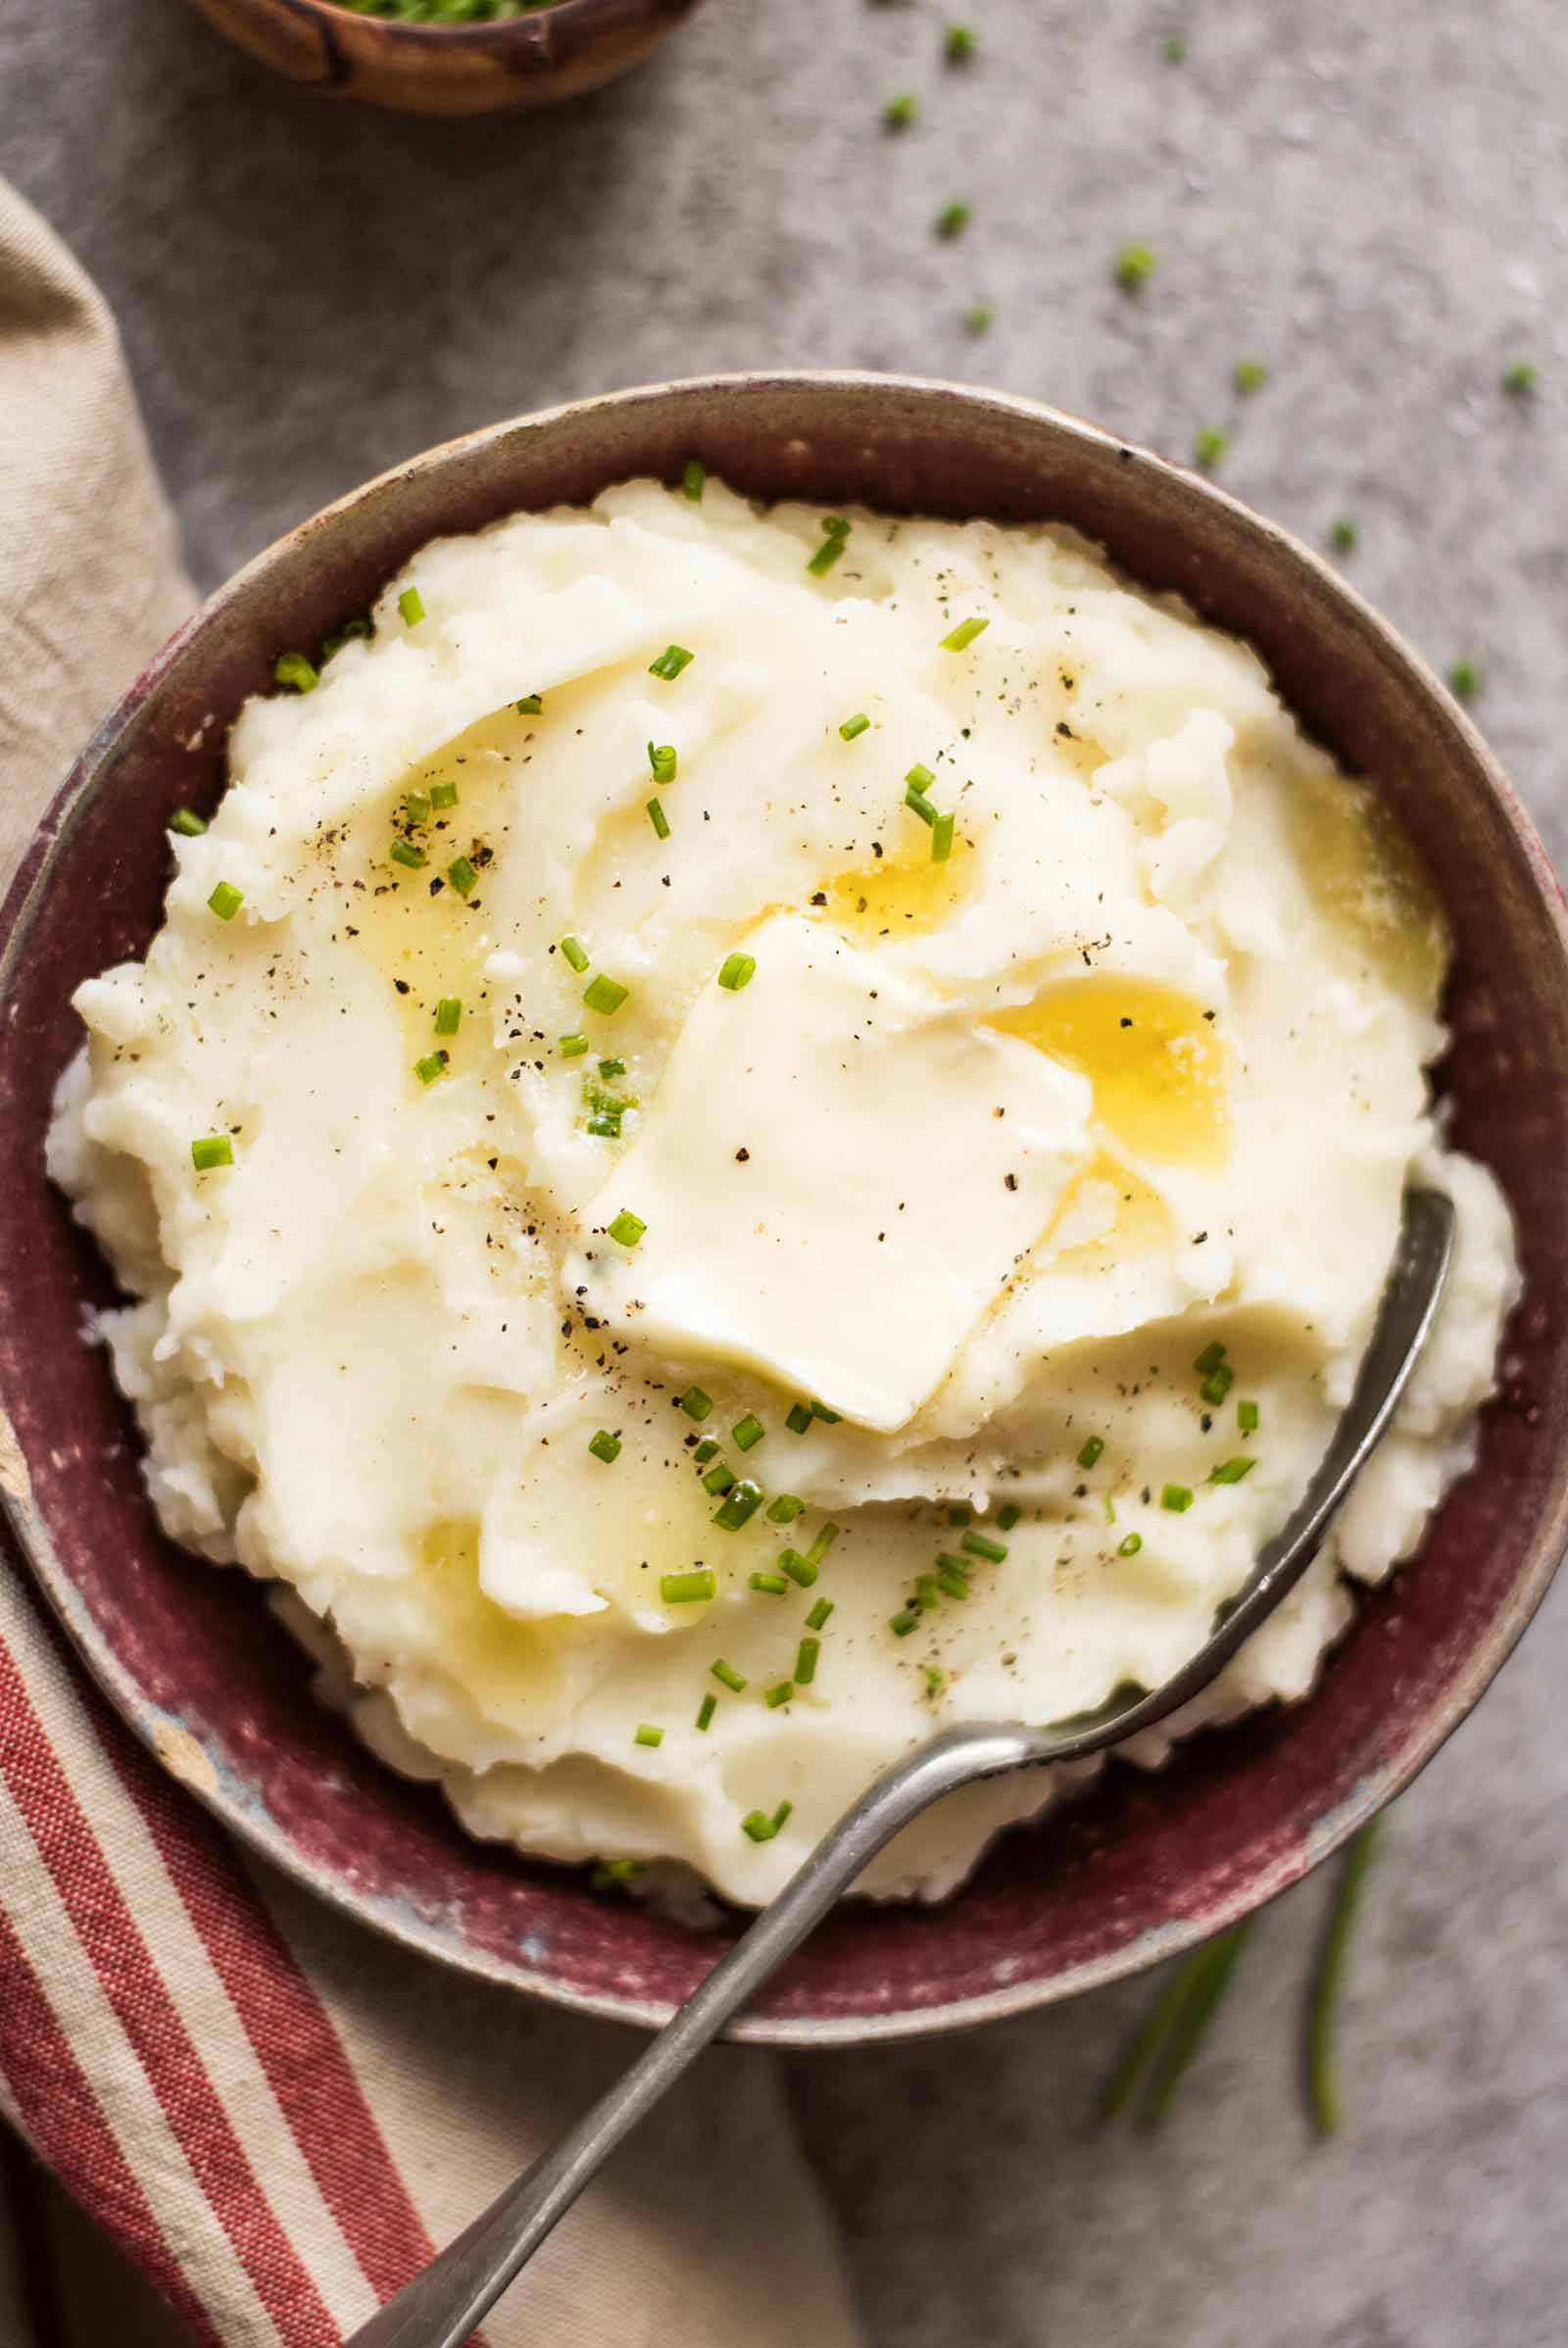 Mashed Potatoes Recipe For Two
 Slow Cooker Mashed Potatoes Recipe